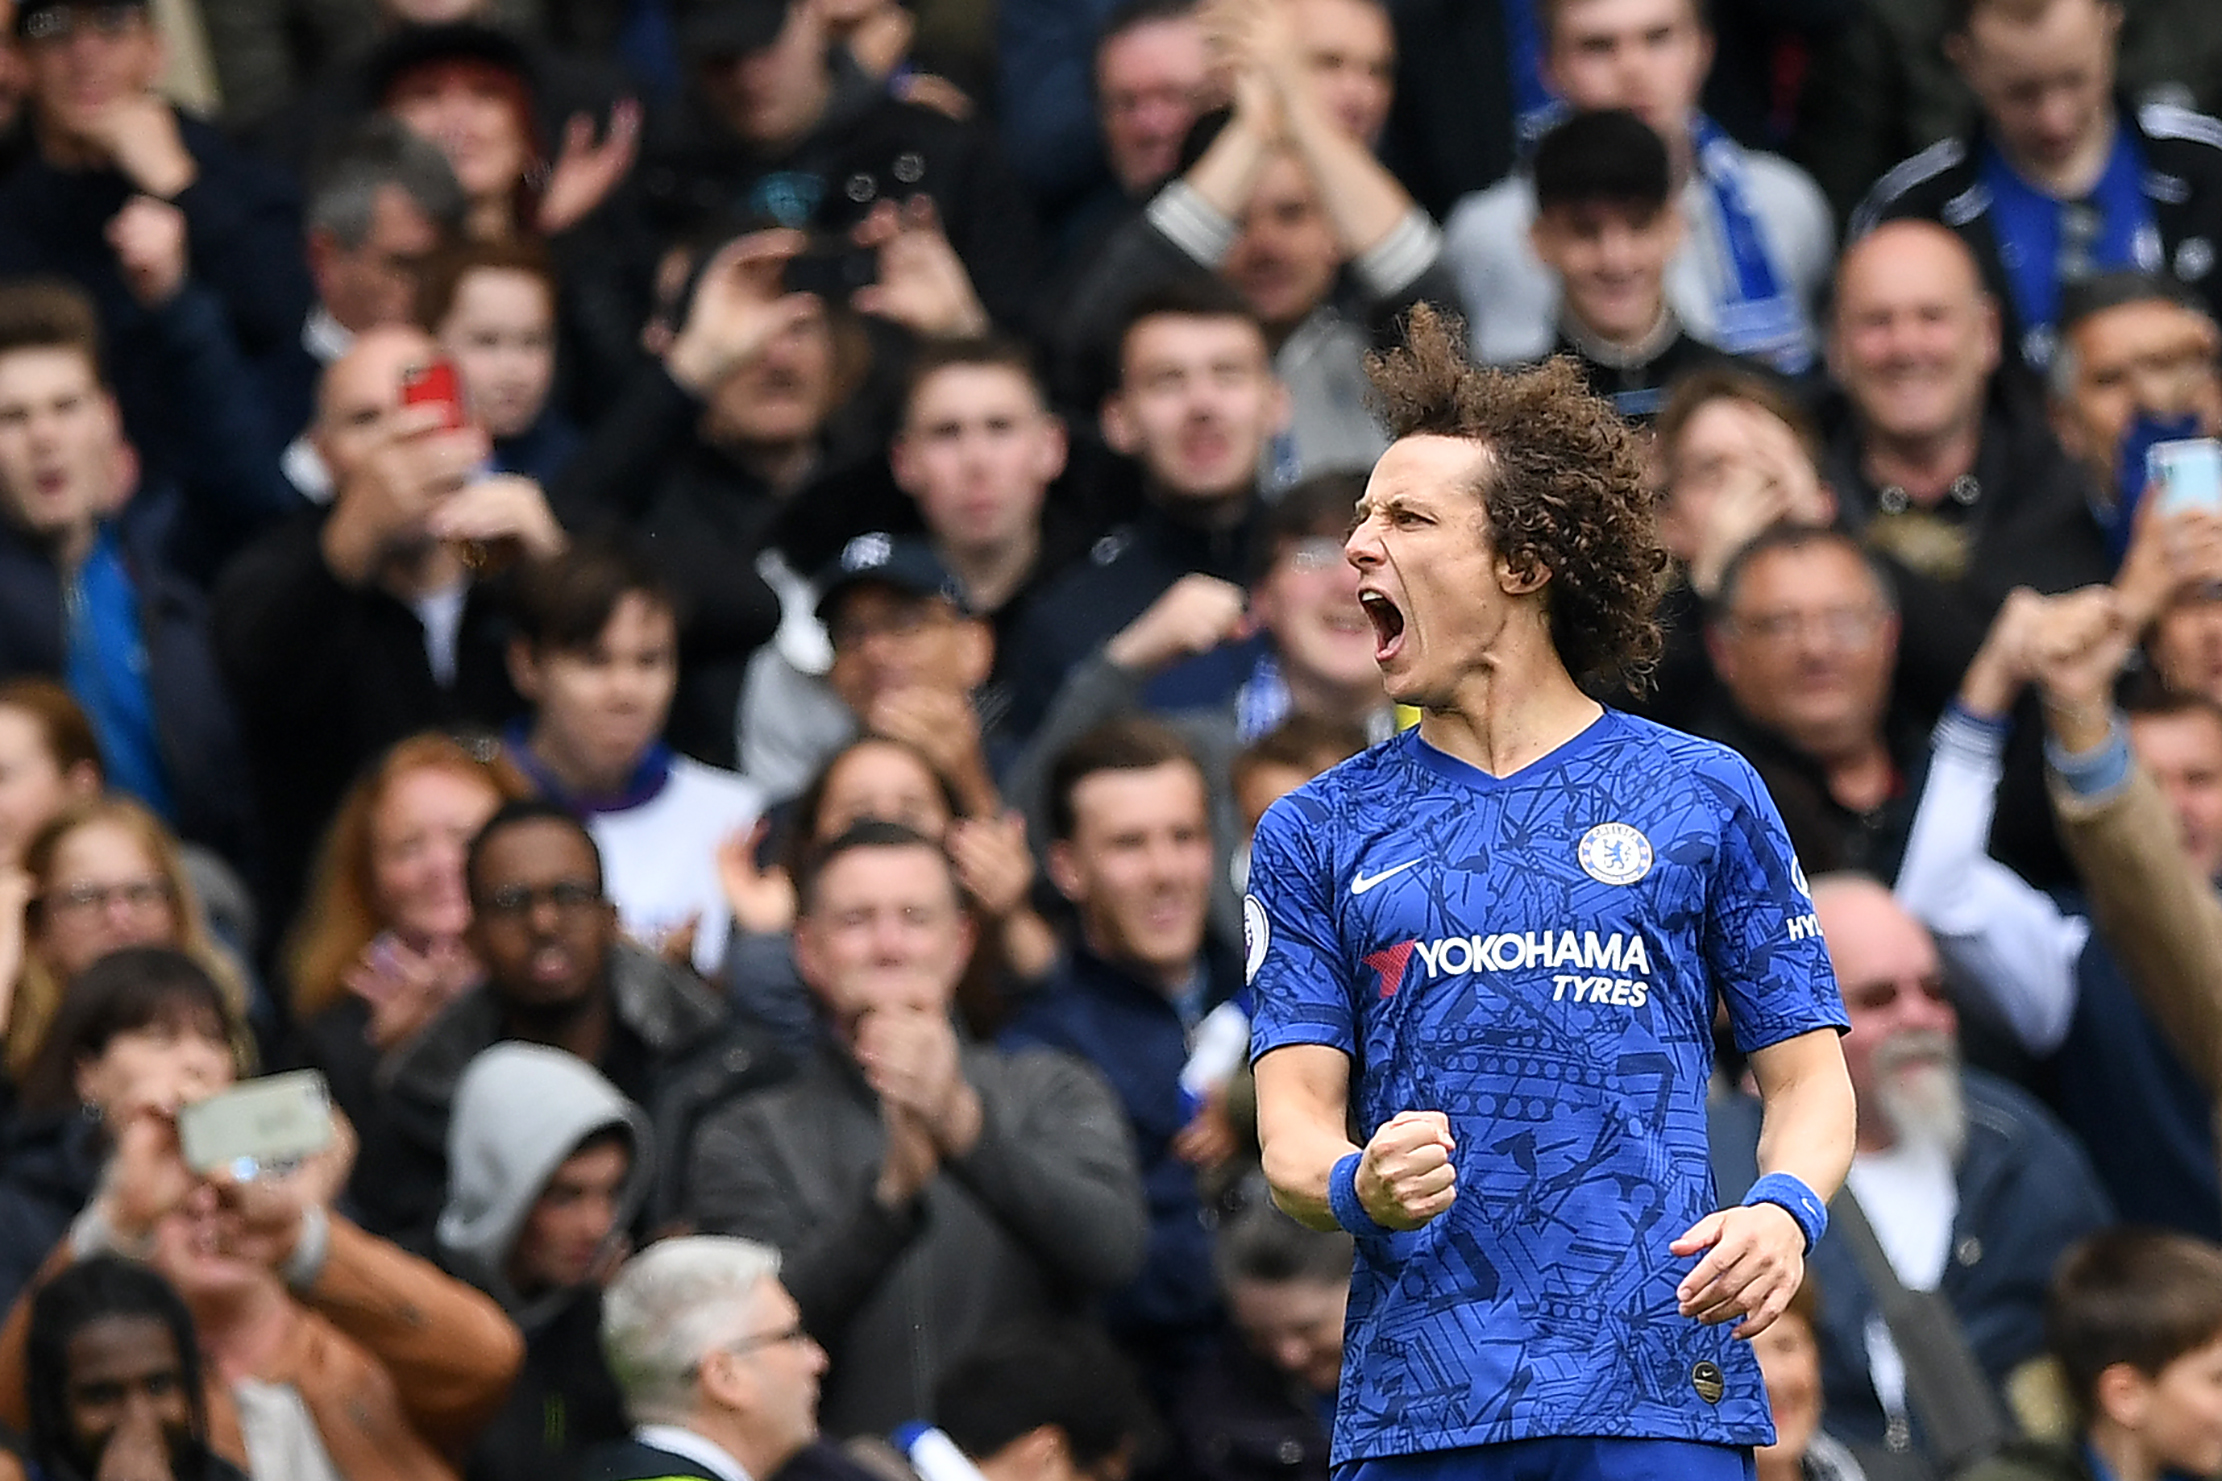 TOPSHOT - Chelsea's Brazilian defender David Luiz celebrates scoring his team's second goal during the English Premier League football match between Chelsea and Watford at Stamford Bridge in London on May 5, 2019. (Photo by Daniel LEAL-OLIVAS / AFP) / RESTRICTED TO EDITORIAL USE. No use with unauthorized audio, video, data, fixture lists, club/league logos or 'live' services. Online in-match use limited to 120 images. An additional 40 images may be used in extra time. No video emulation. Social media in-match use limited to 120 images. An additional 40 images may be used in extra time. No use in betting publications, games or single club/league/player publications. /         (Photo credit should read DANIEL LEAL-OLIVAS/AFP/Getty Images)